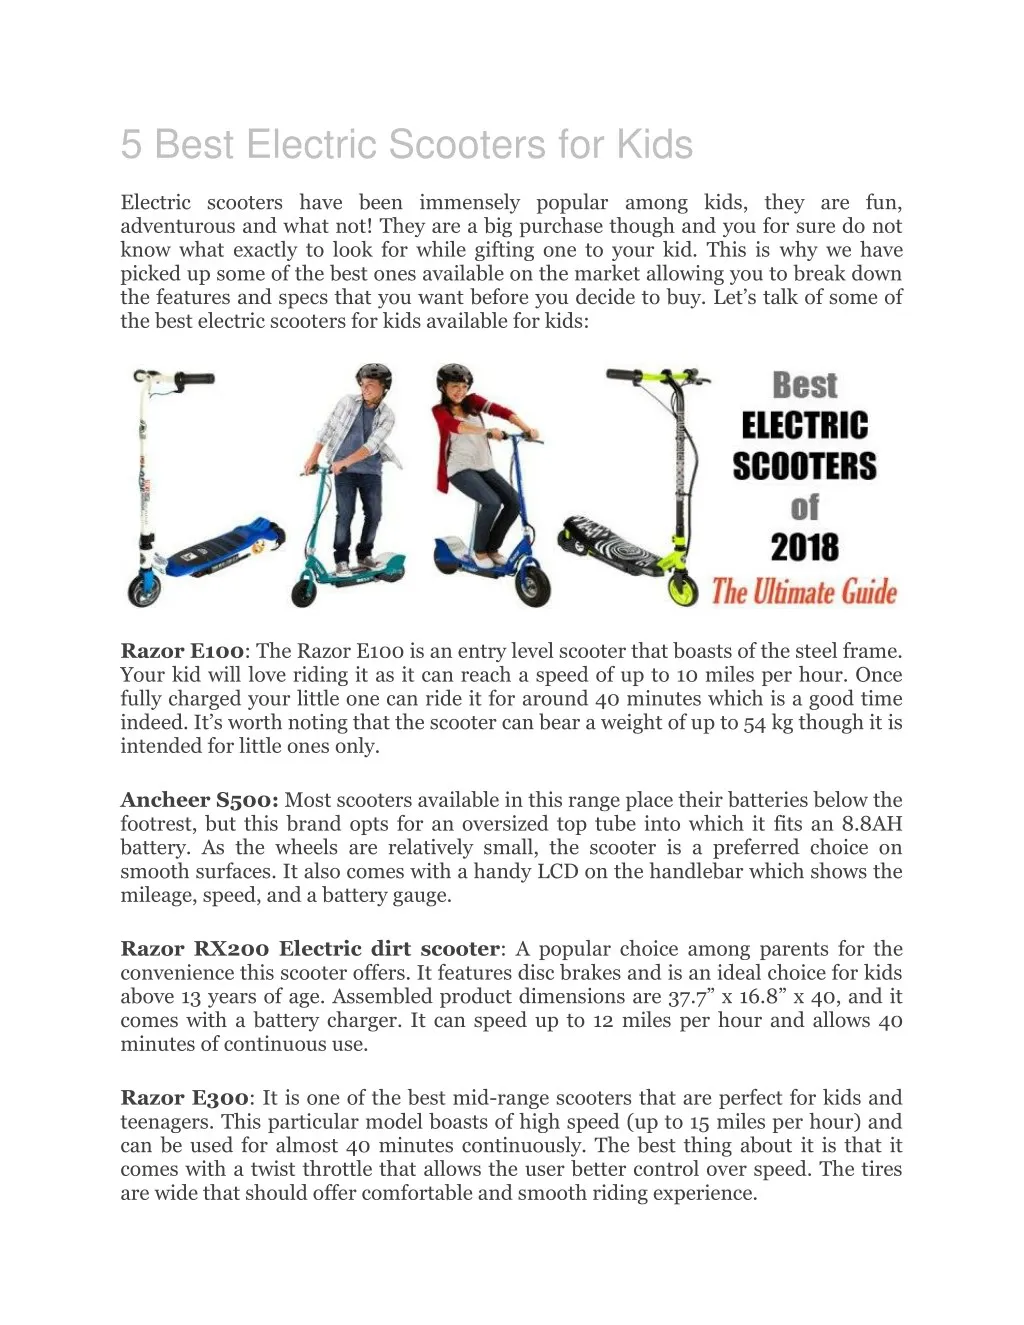 5 best electric scooters for kids